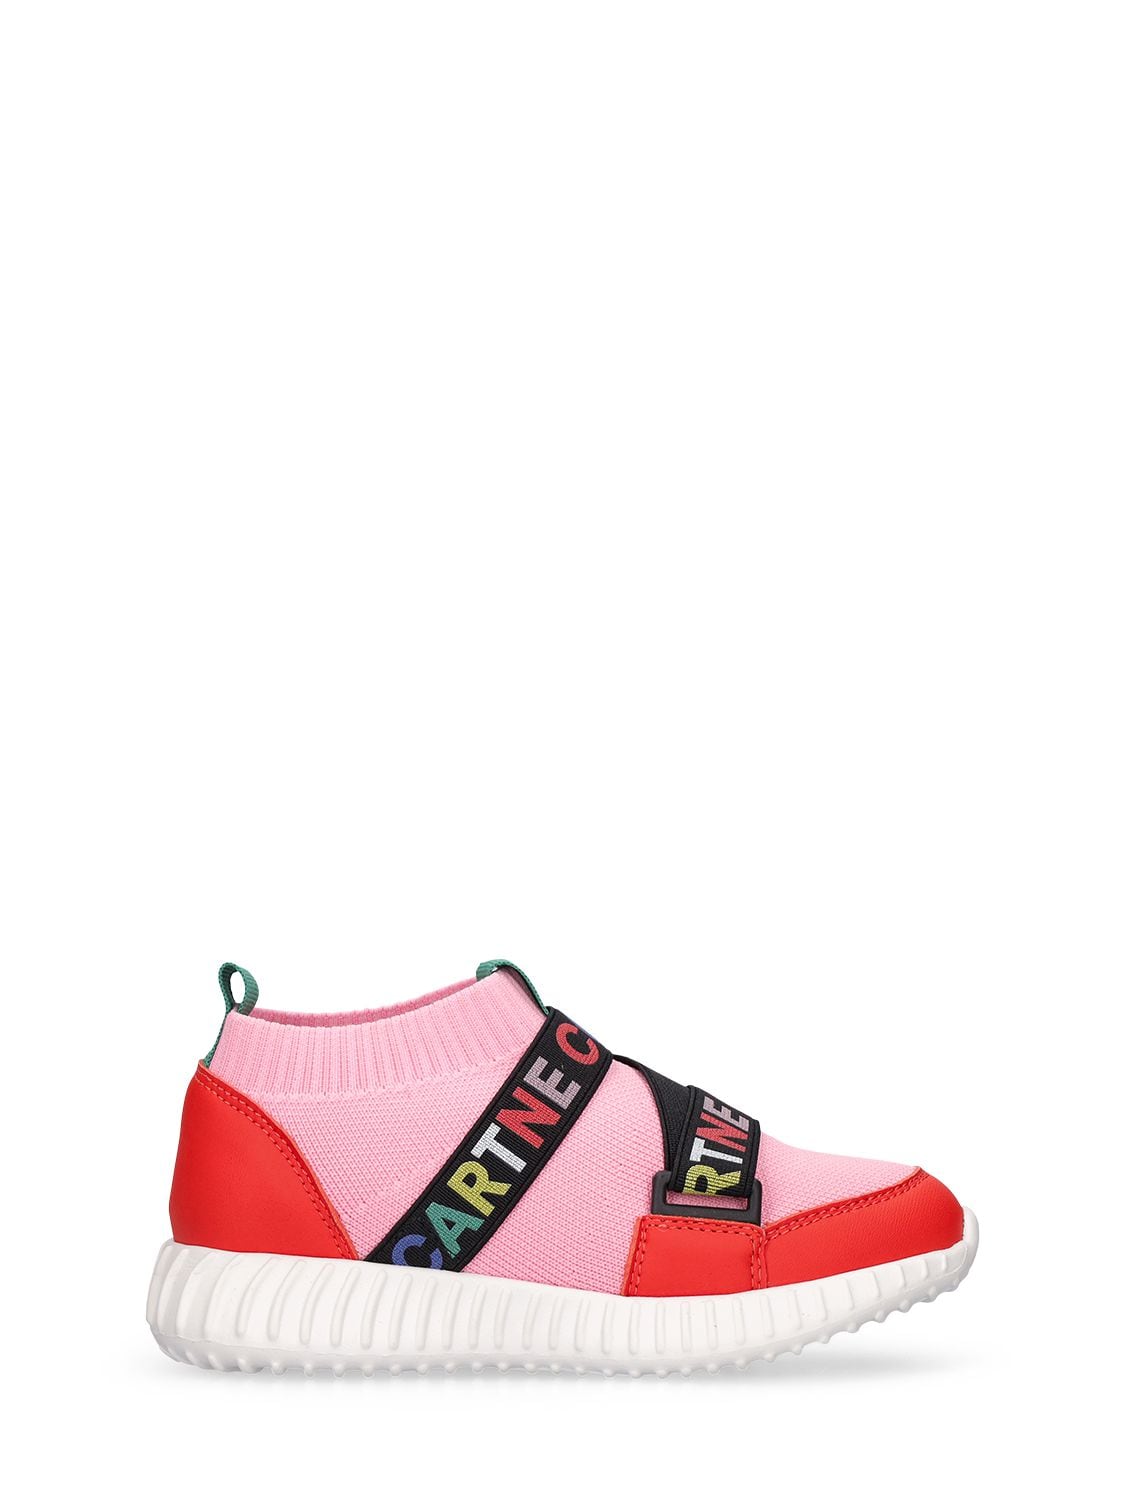 Stella Mccartney Kids' Knit Recycled Nylon Sneakers In Pink